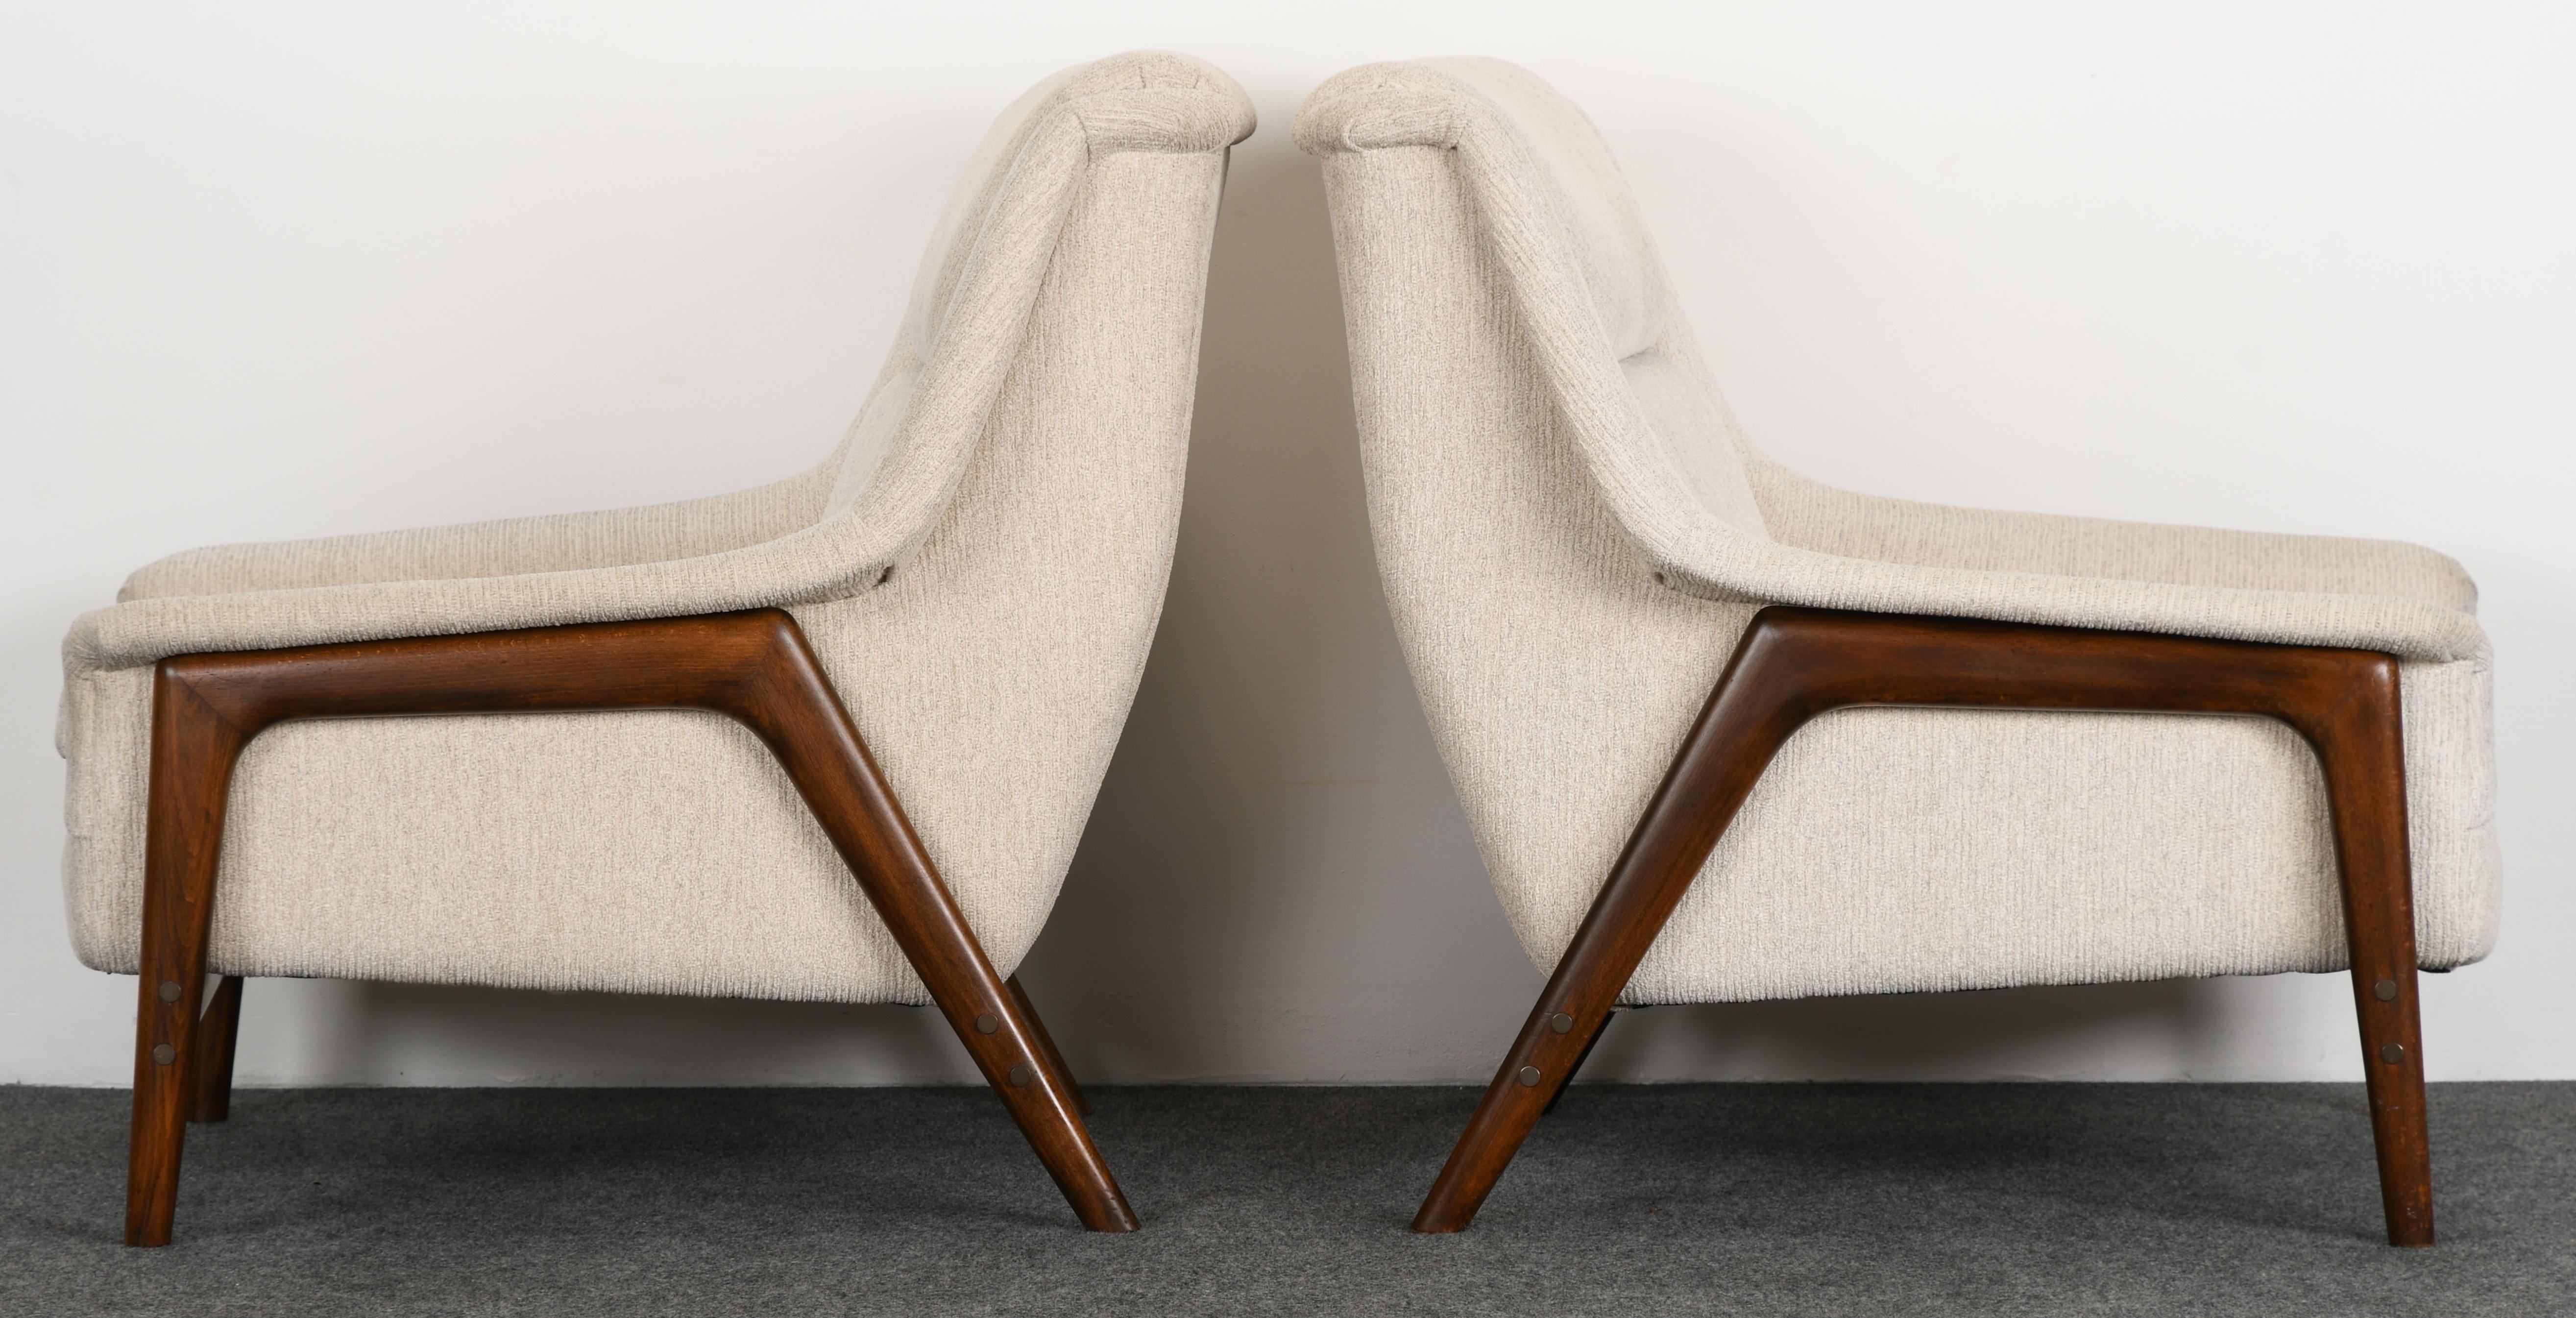 Mid-20th Century Pair of Folke Ohlsson Lounge Chairs for DUX, 1960s